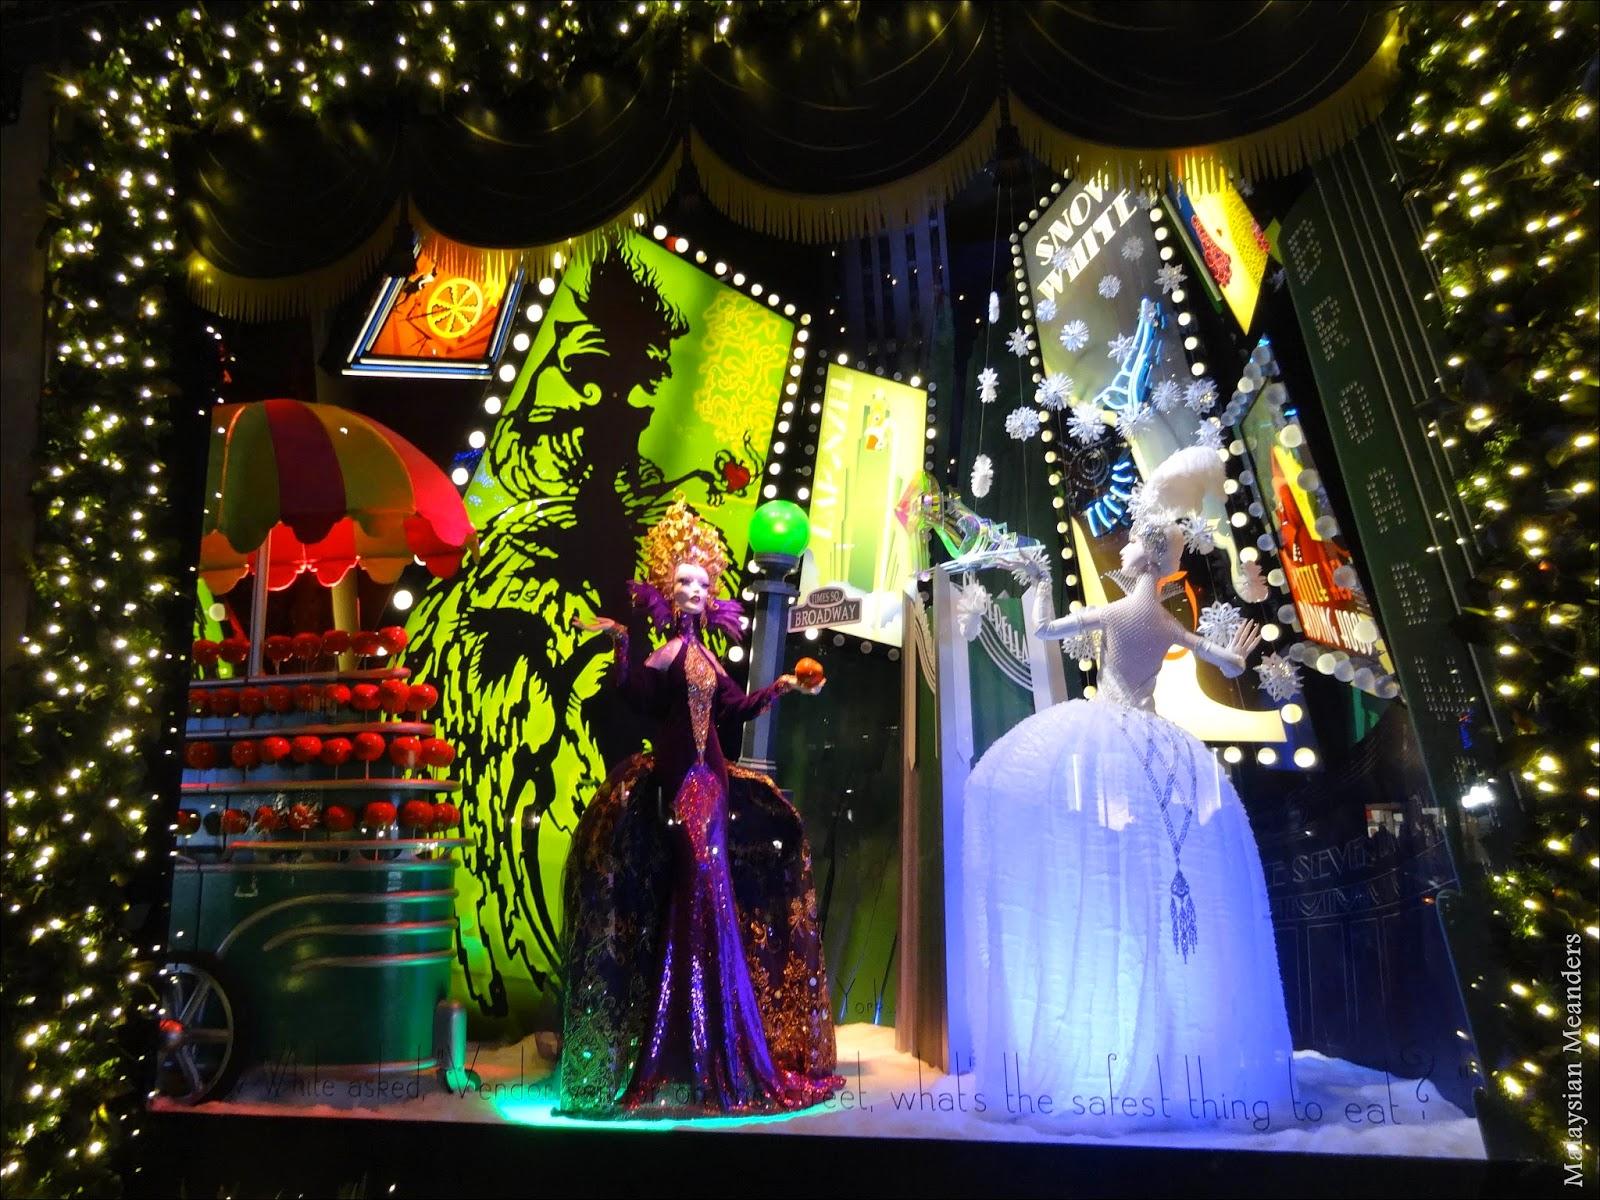 Malaysian Meanders: Saks Fifth Avenue's Enchanting Holiday